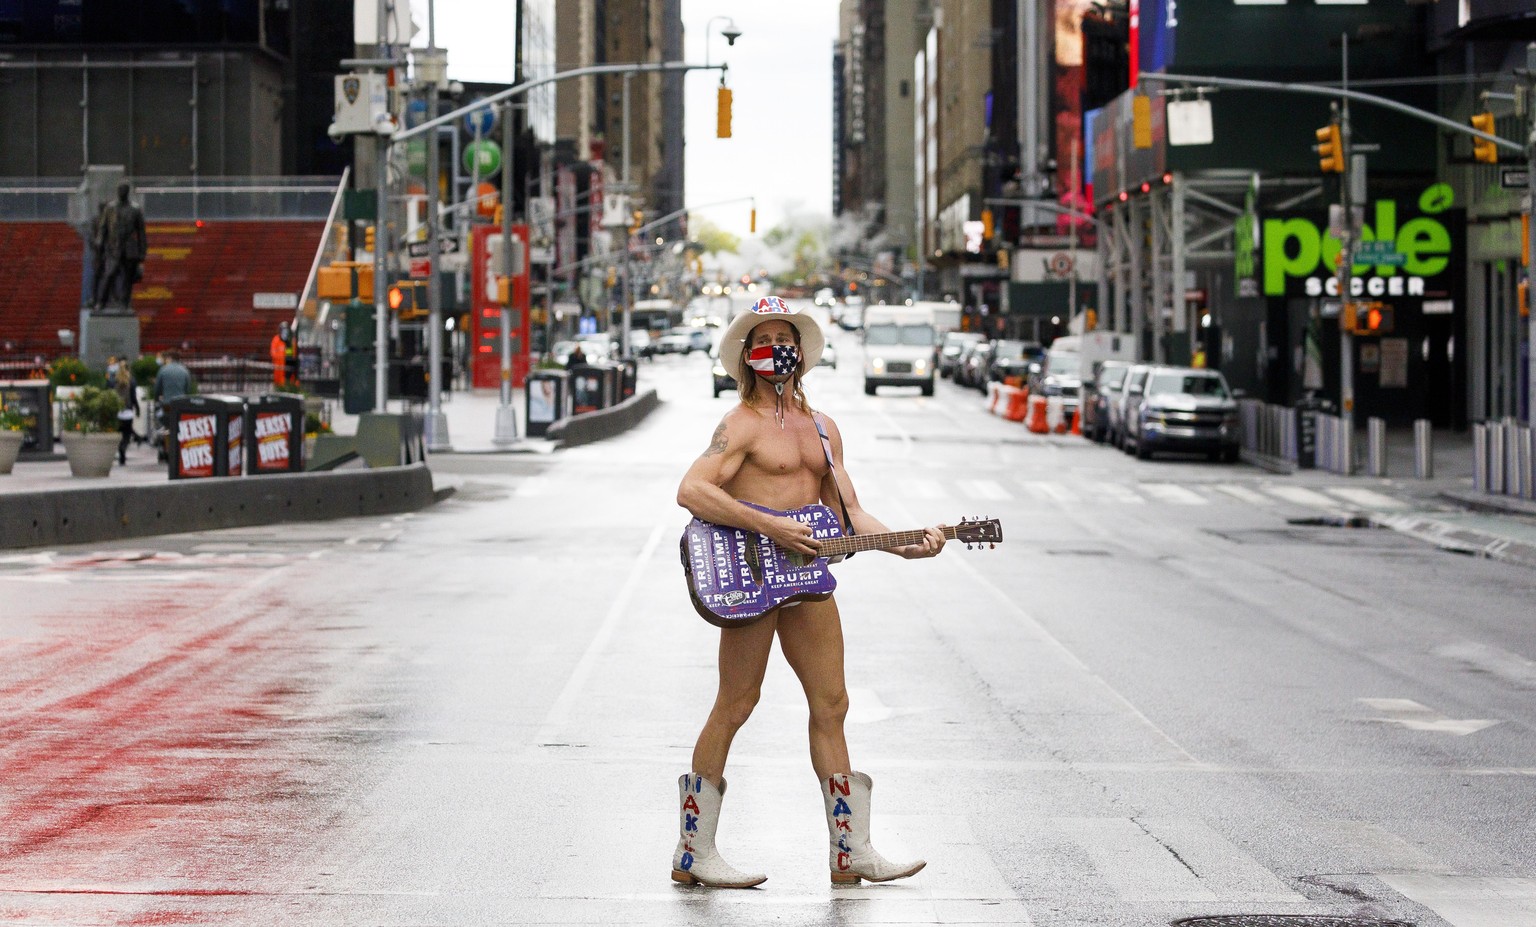 epa08415449 A busker named Robert Burck, known as the Naked Cowboy, stands in the middle of a quiet Times Square in New York, New York, USA, 11 May 2020. EPA/JUSTIN LANE